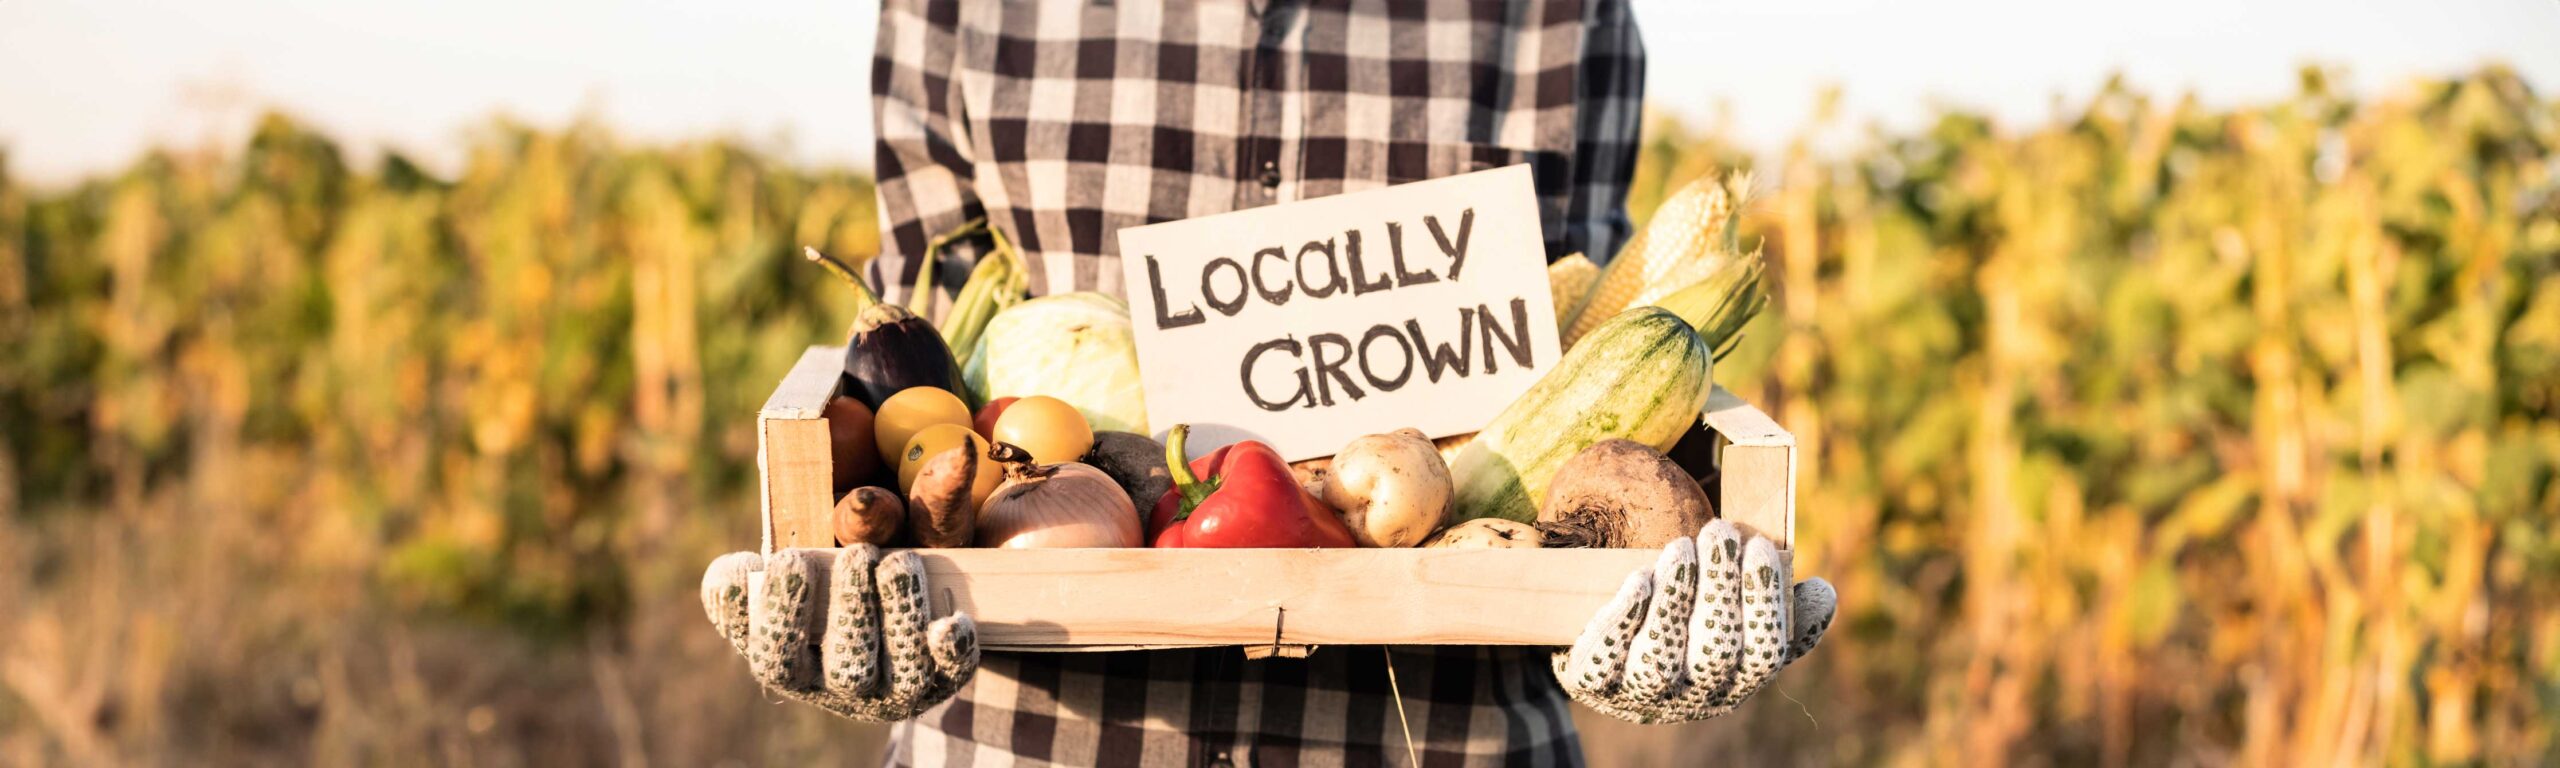 A person holding a "Locally Grown" sign and produce.